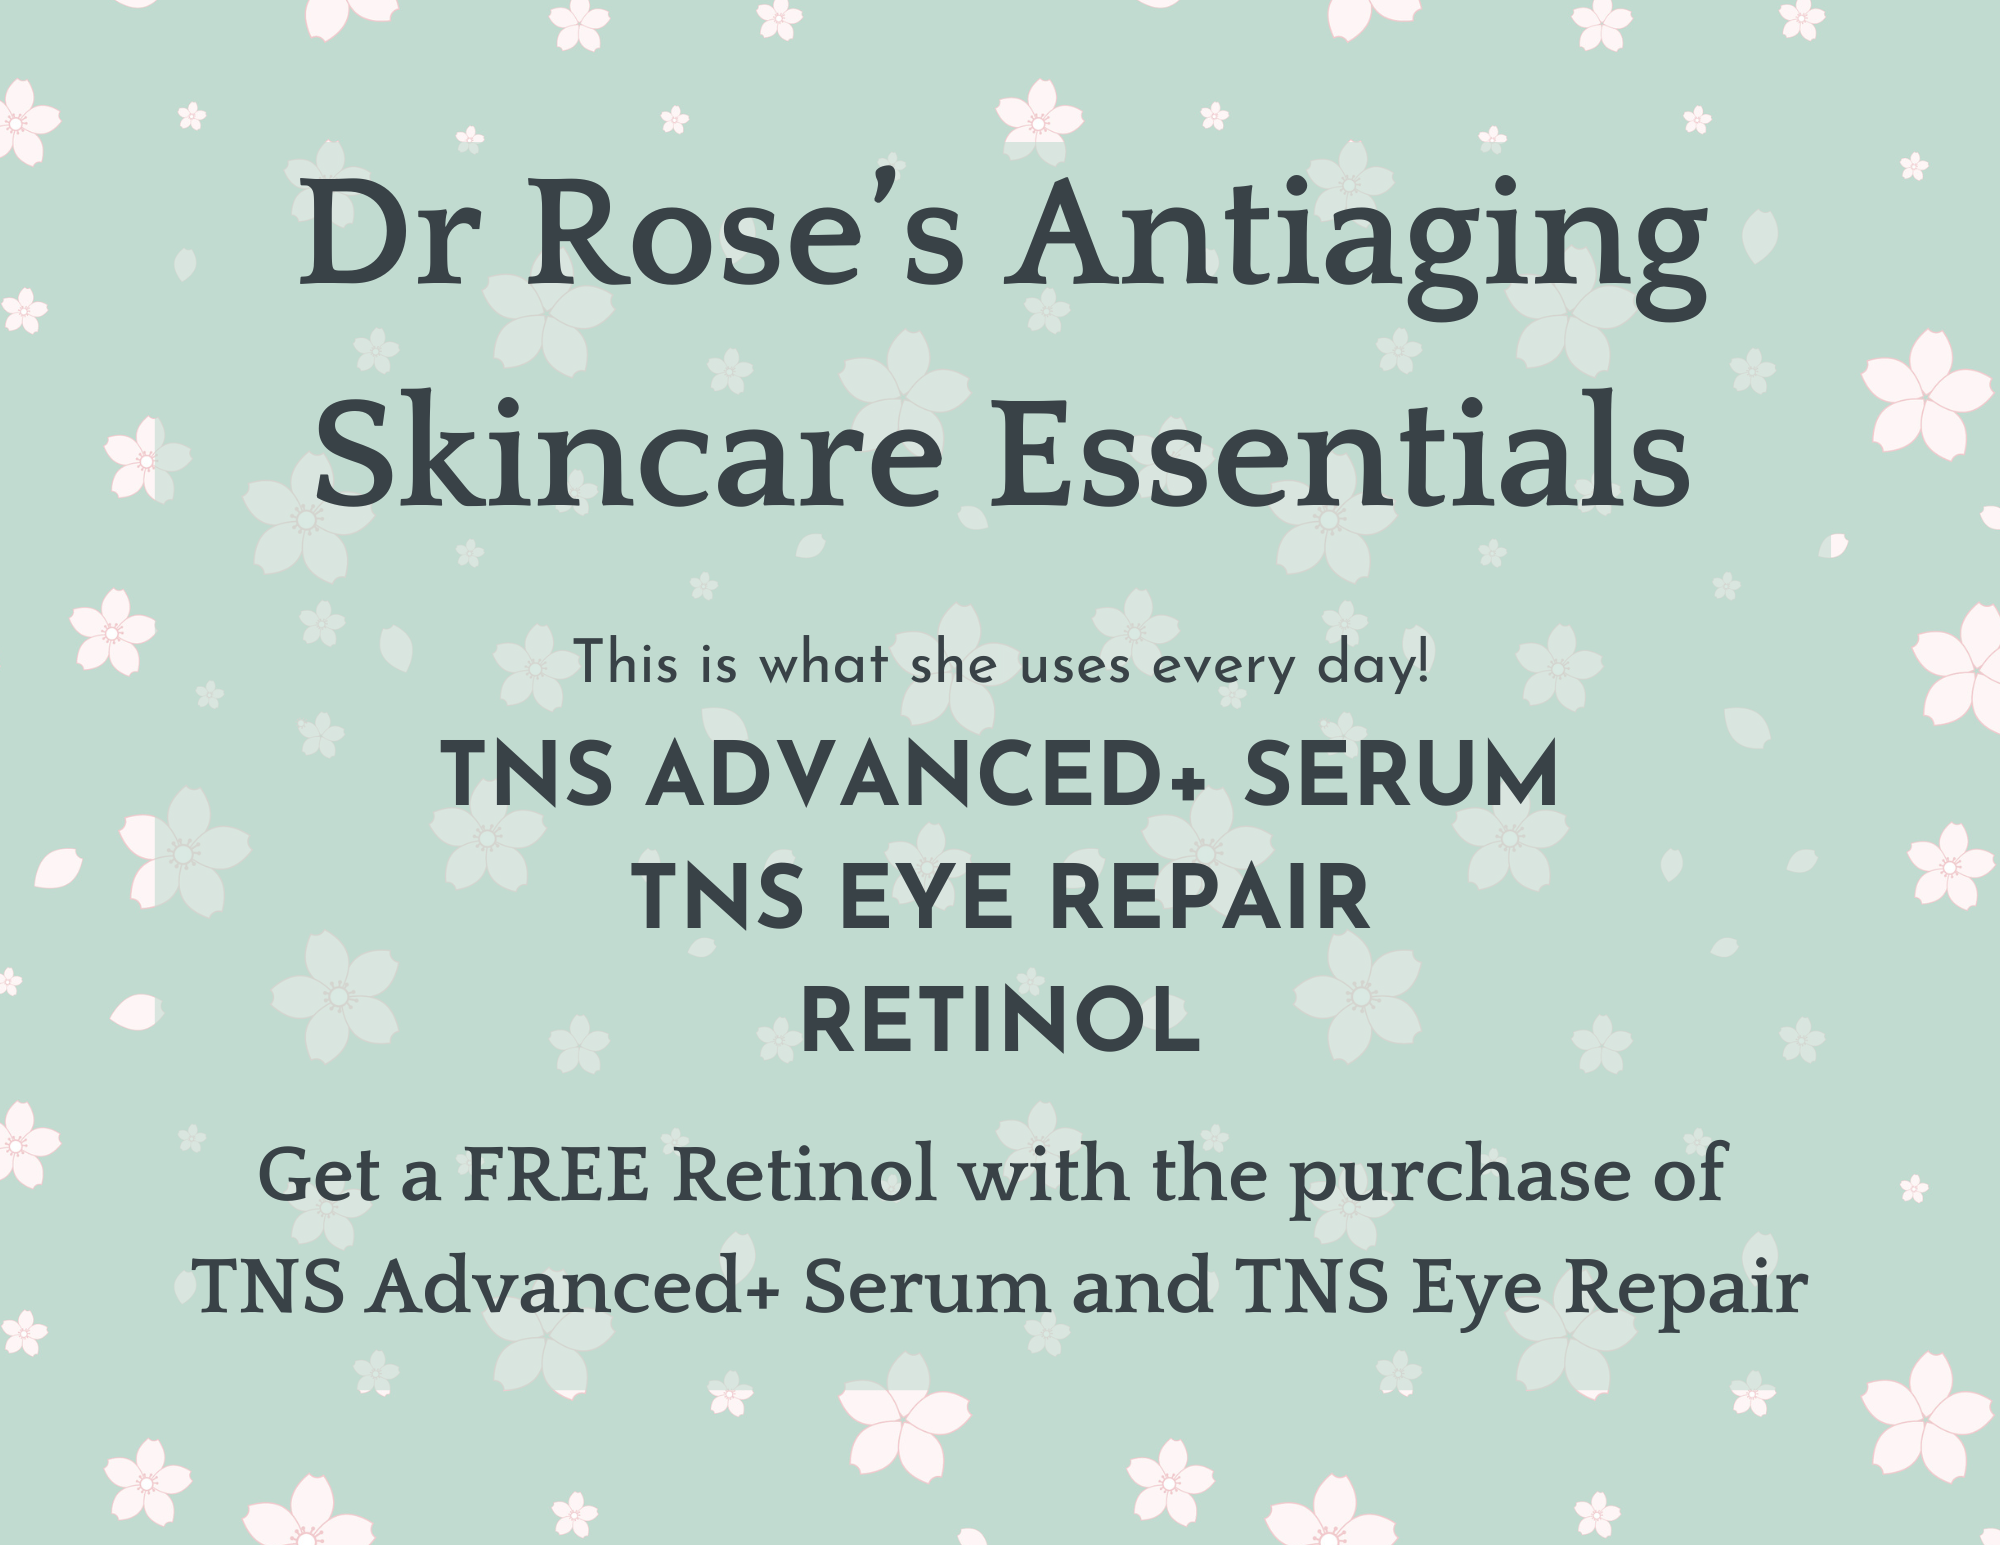 Antiaging skincare Essentials; Free retinol with the purchase of TNS advanced+ Serum and TNS Eye Repair